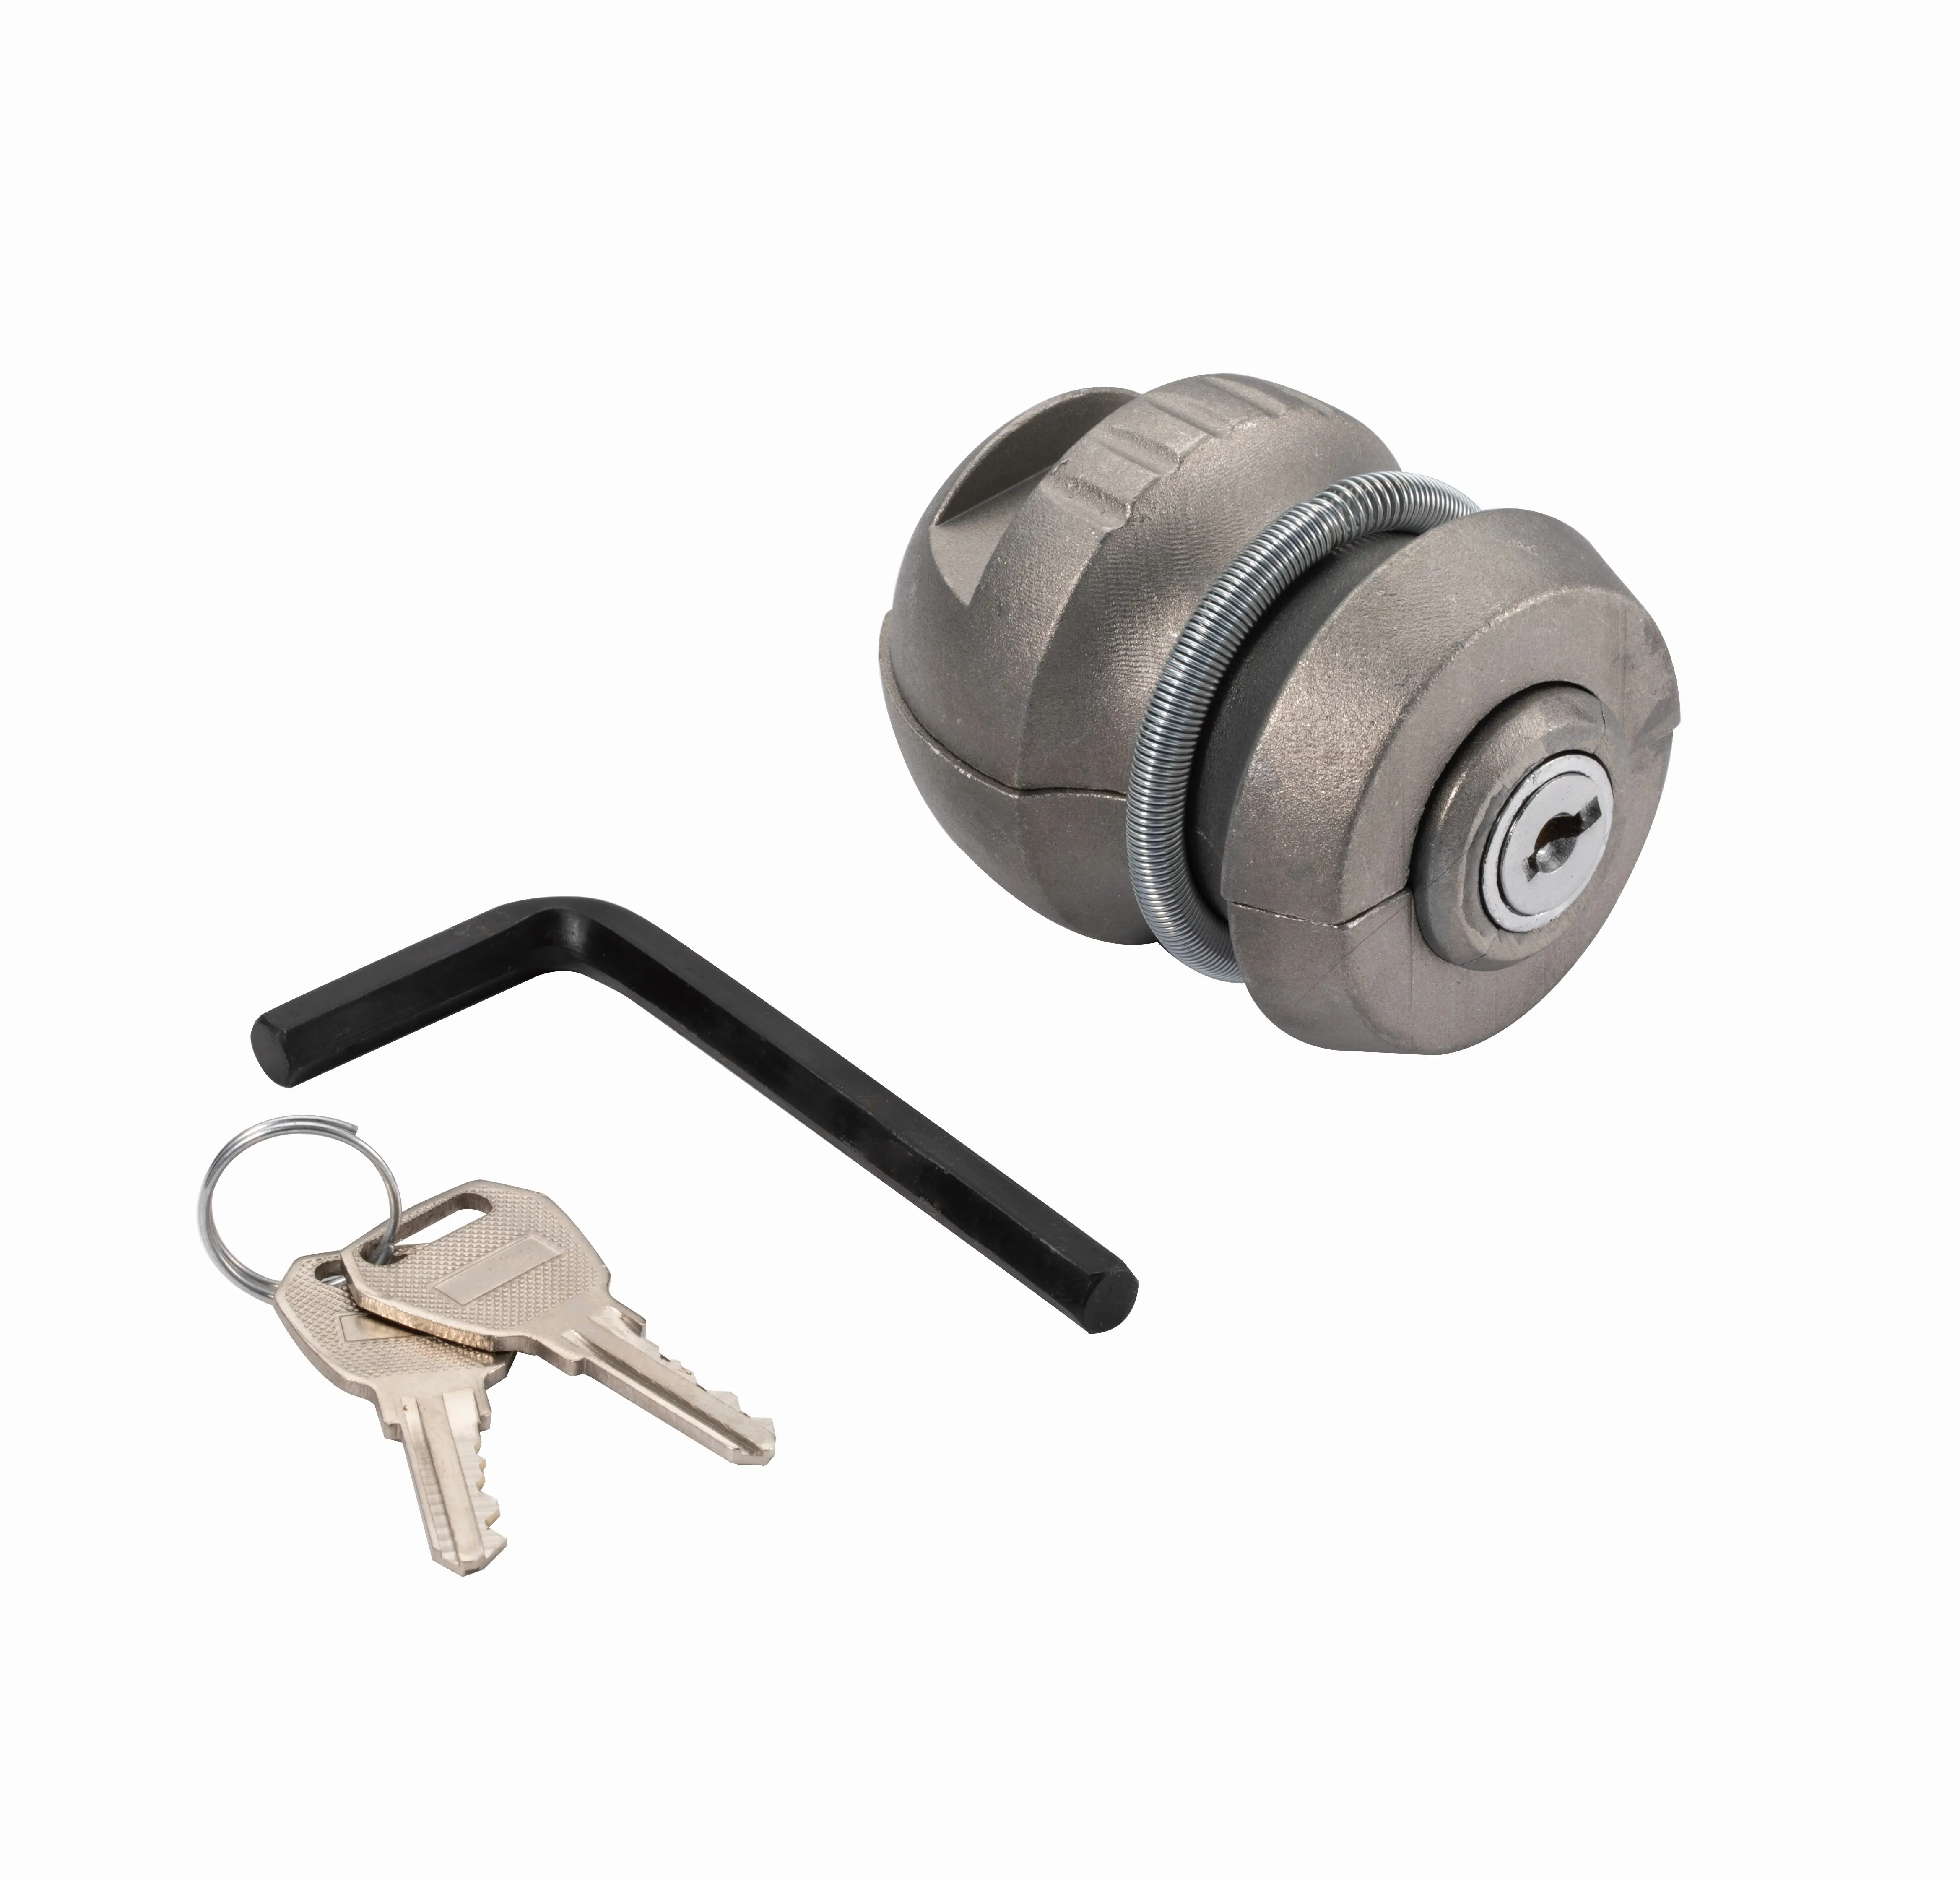 YH1917 50mm Tow Ball for Trailer Coupler Lock With Key Tow Ball Lock